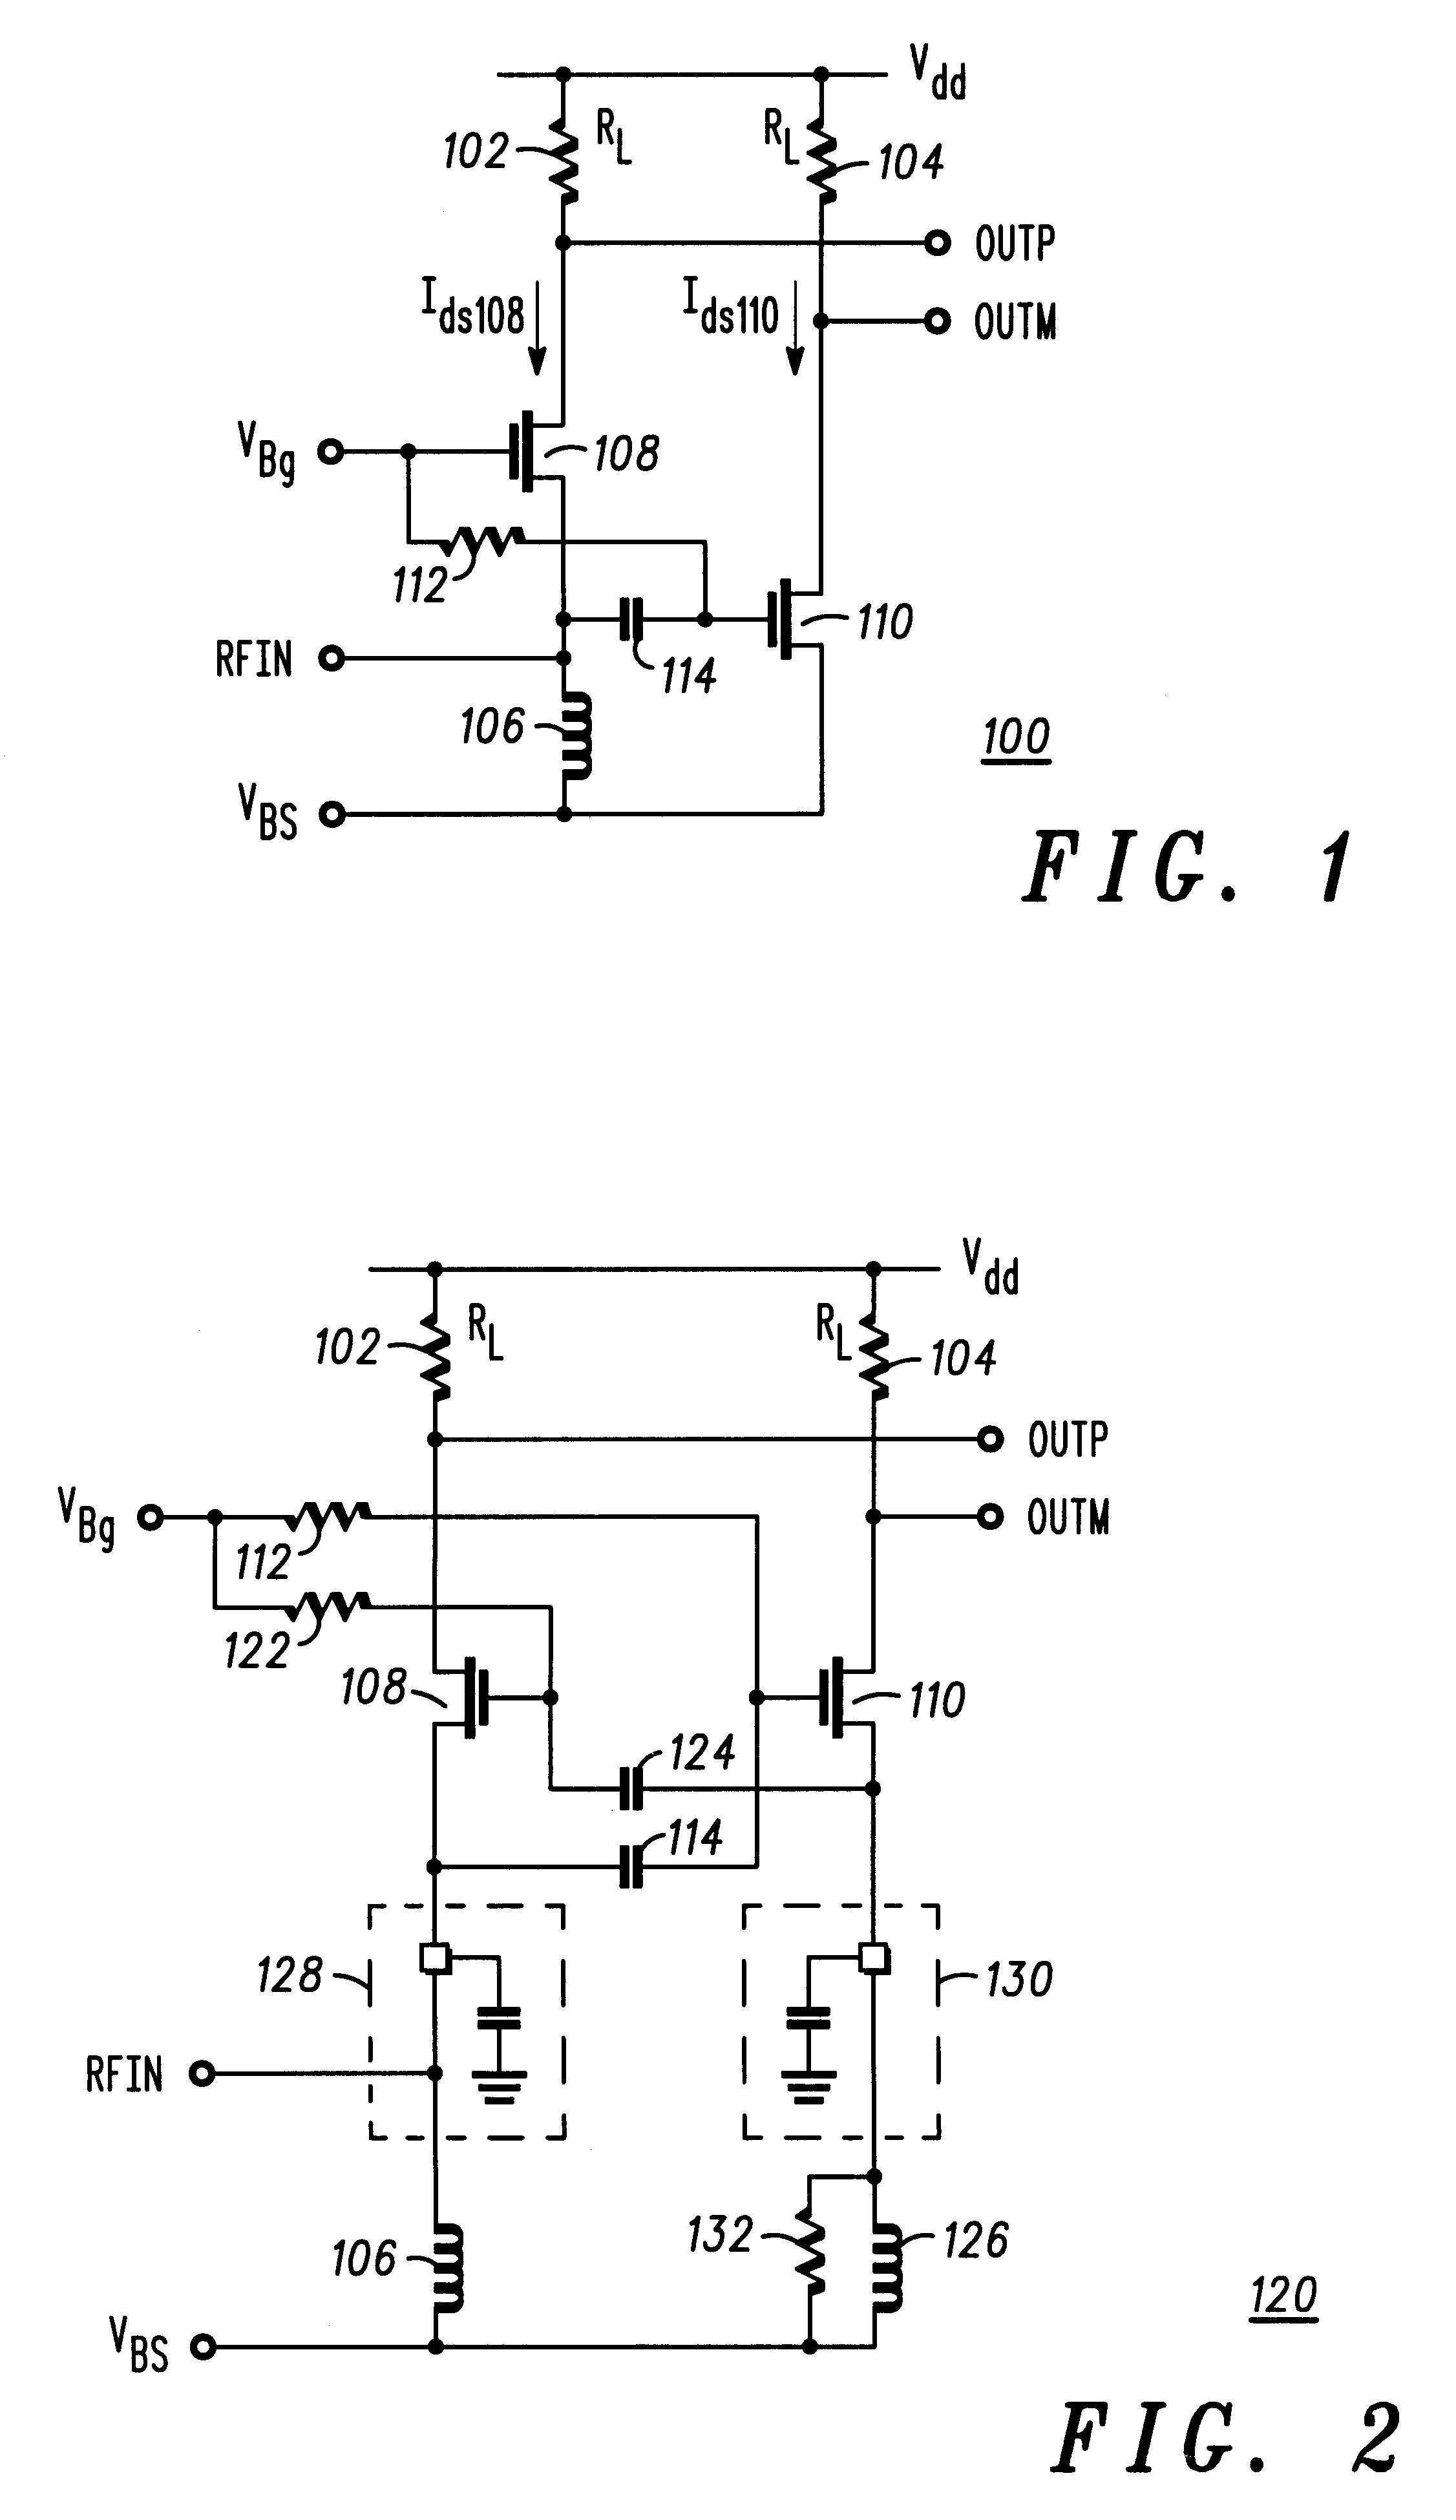 Single ended input, differential output amplifier